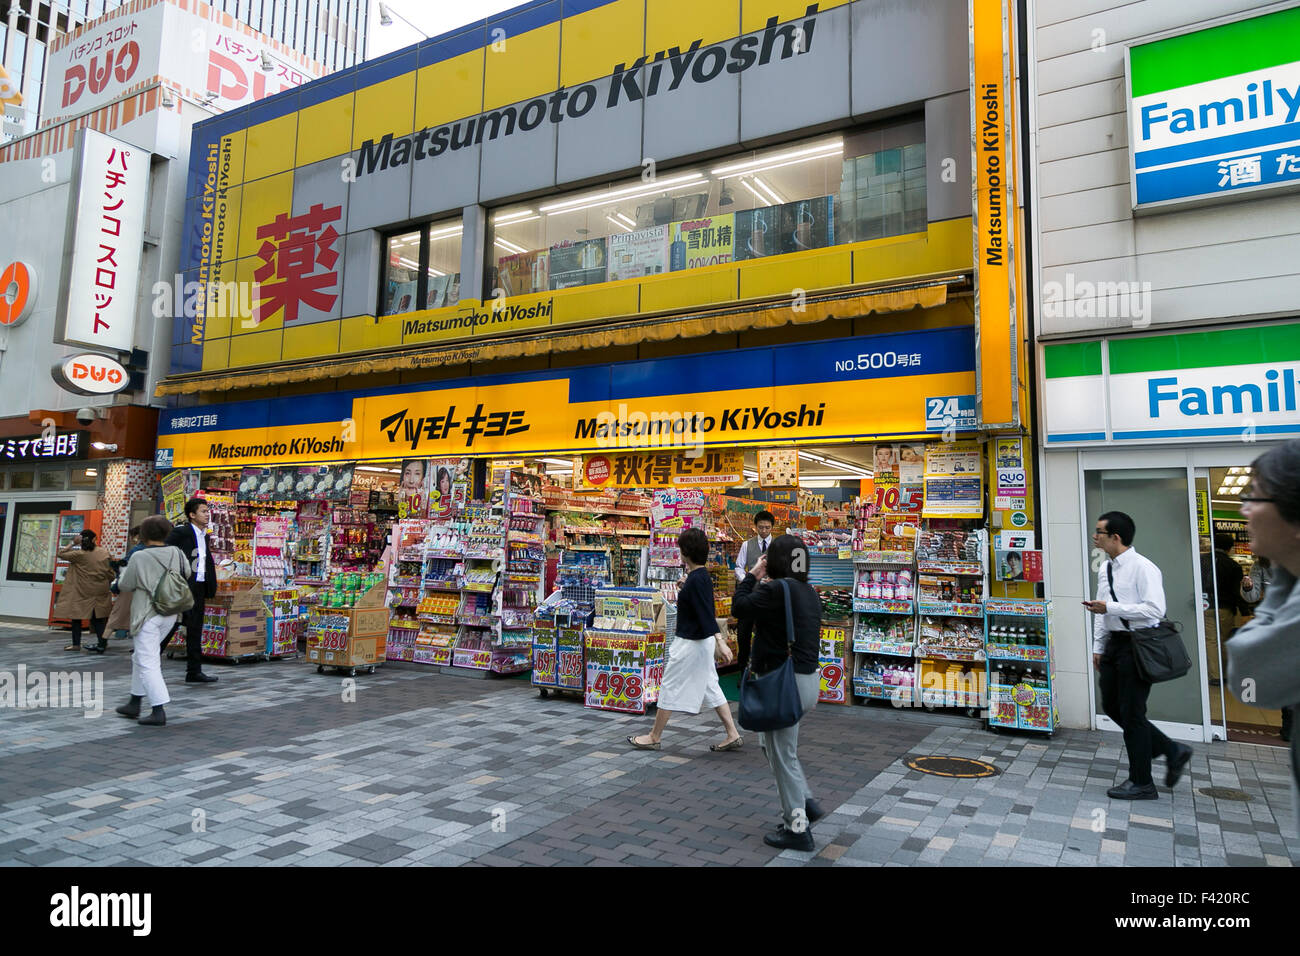 Pedestrians walk past a branch of Matsumoto Kiyoshi drugstore in Yurakucho on October 14, 2015, Tokyo, Japan. Matsumoto Kiyoshi is Japan's biggest pharmacy chain selling low price cosmetics and medicine. It was founded in 1932 and claims to serve over 16% of the Japanese population. © Rodrigo Reyes Marin/AFLO/Alamy Live News Stock Photo